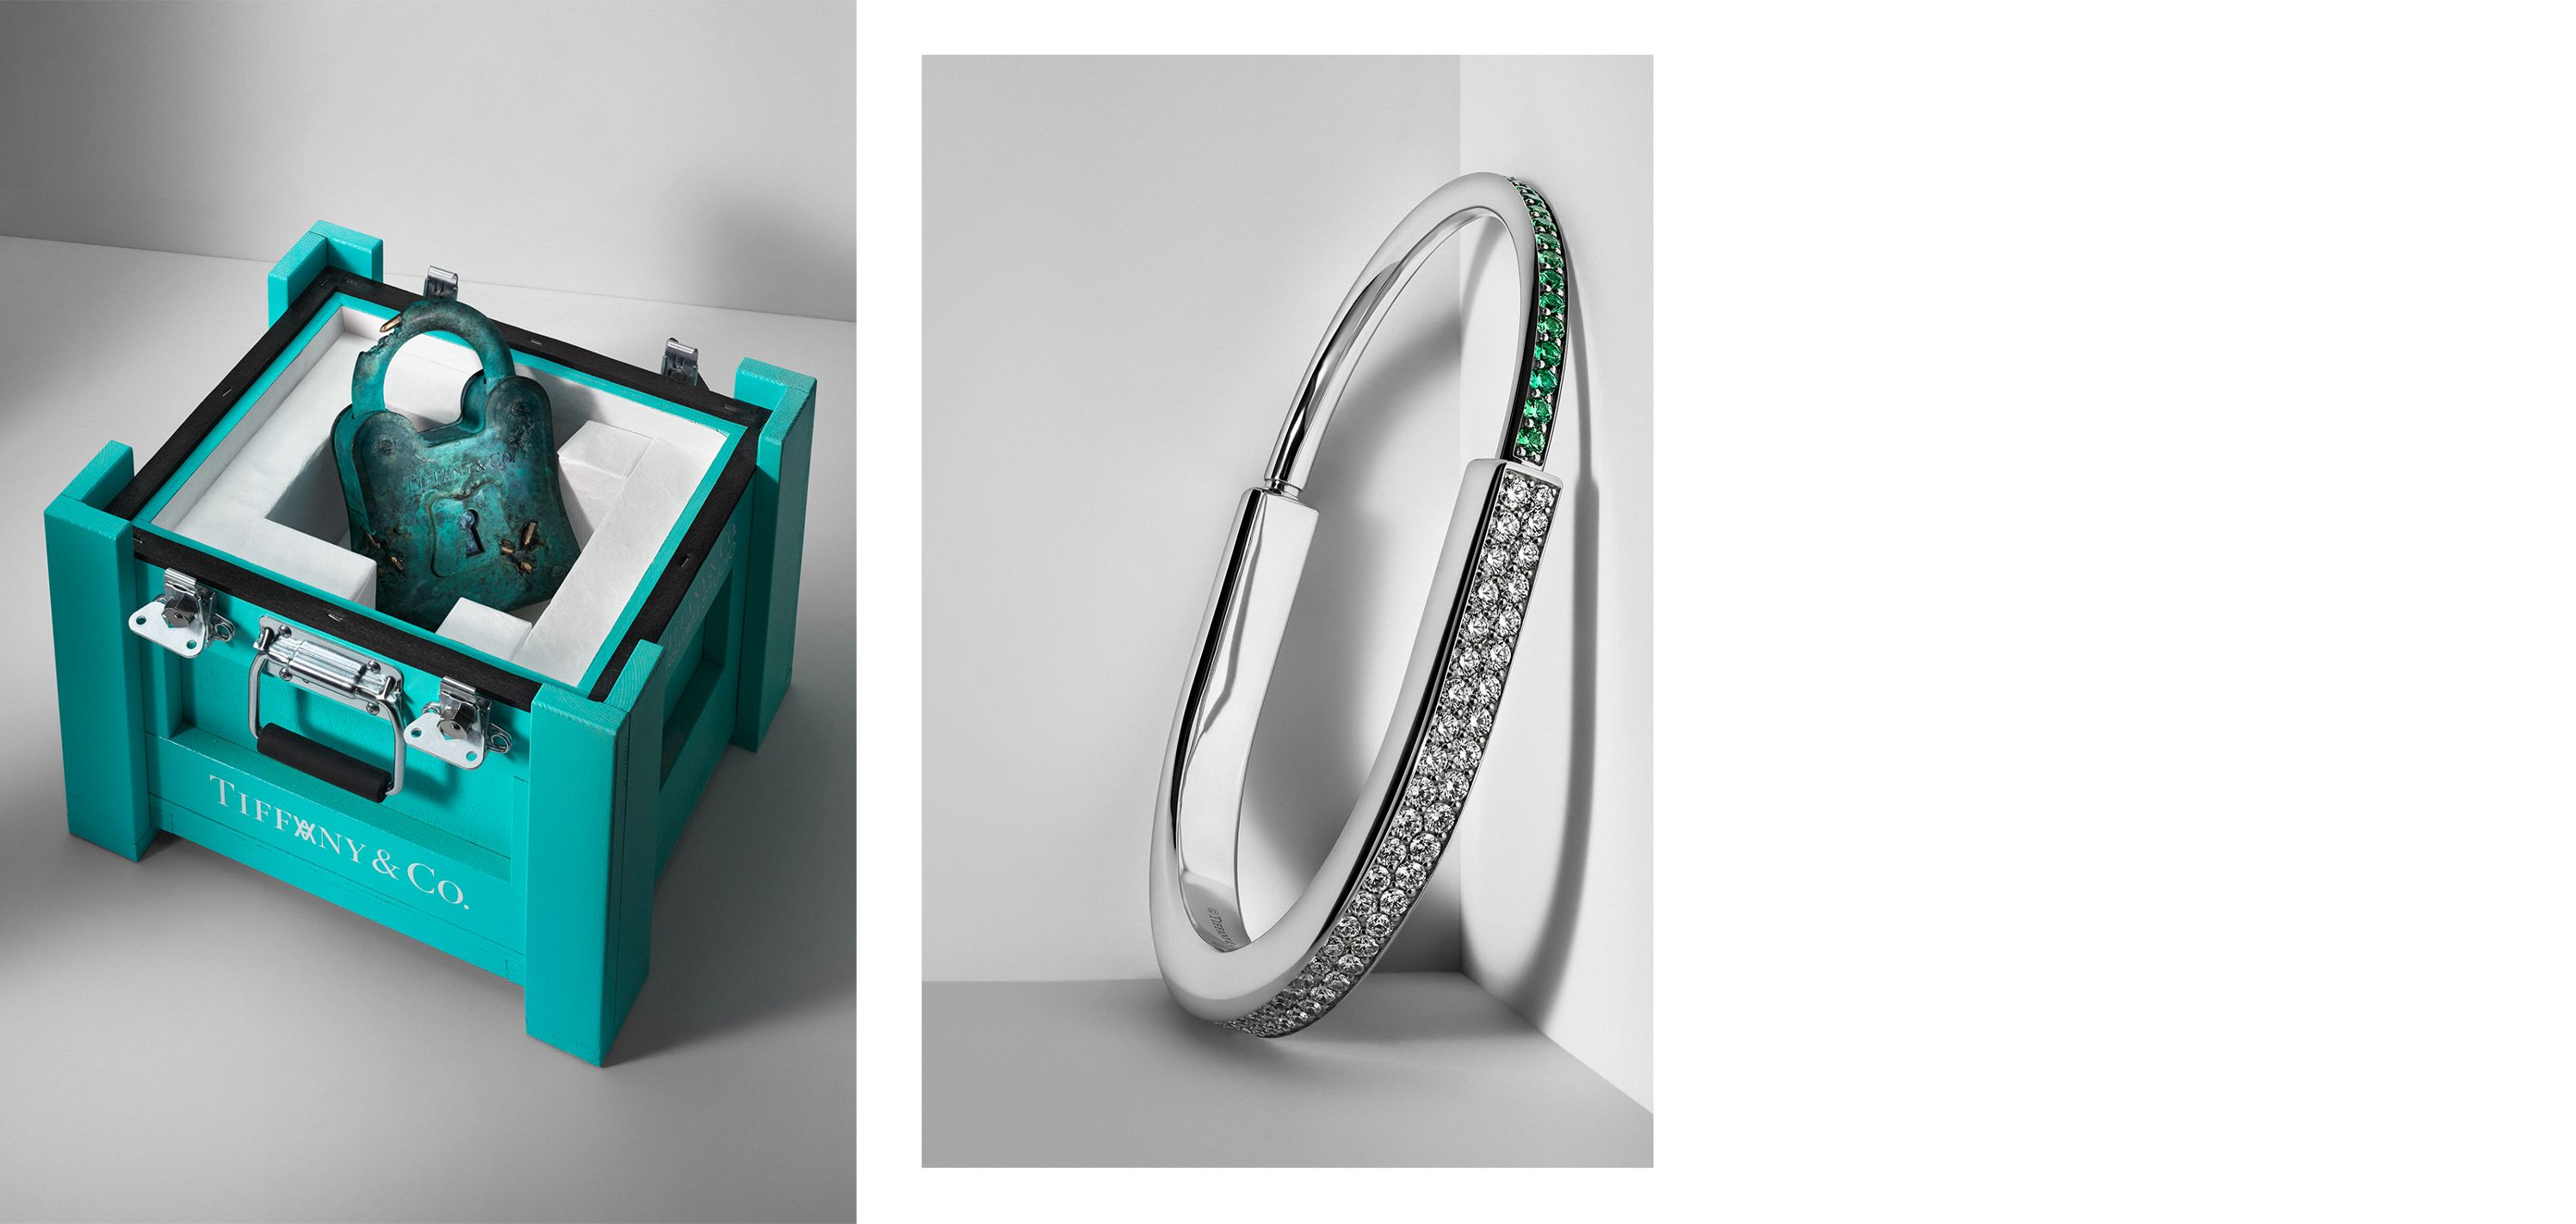 99 All Things Tiffany & Co. ideas in 2023